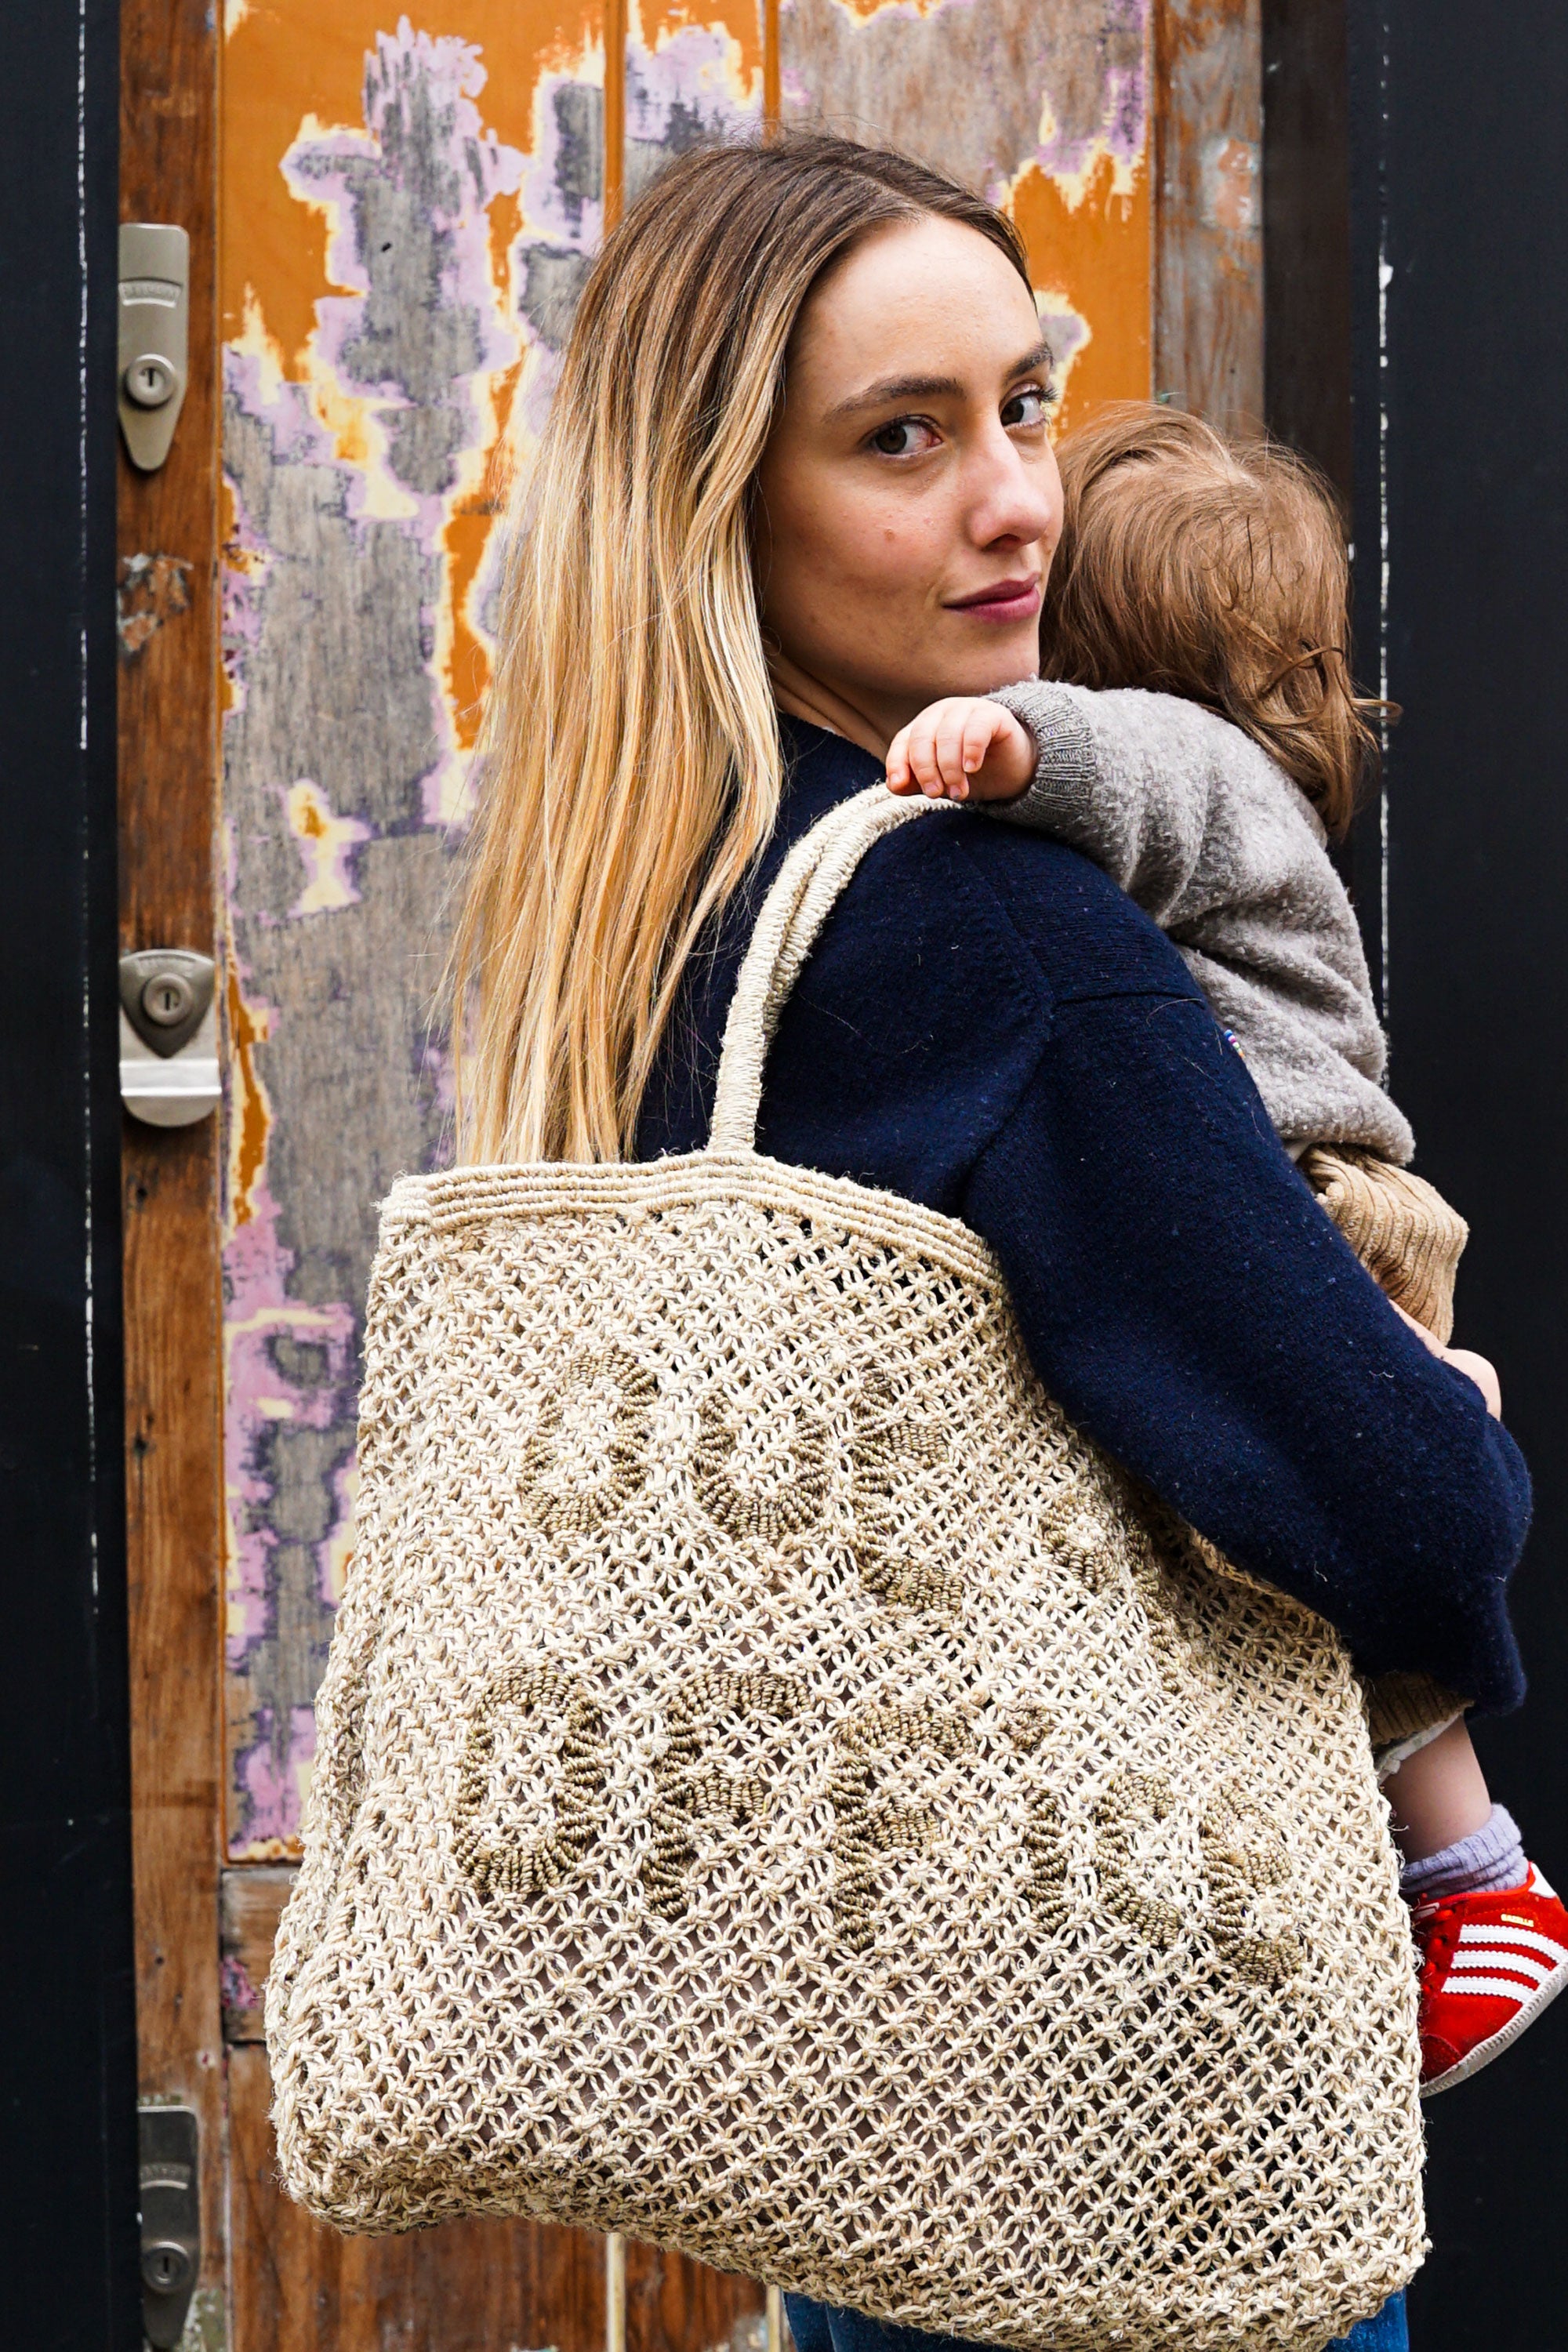 TIBA + MARL x The Jacksons Jute Tote 'Out Of Office'